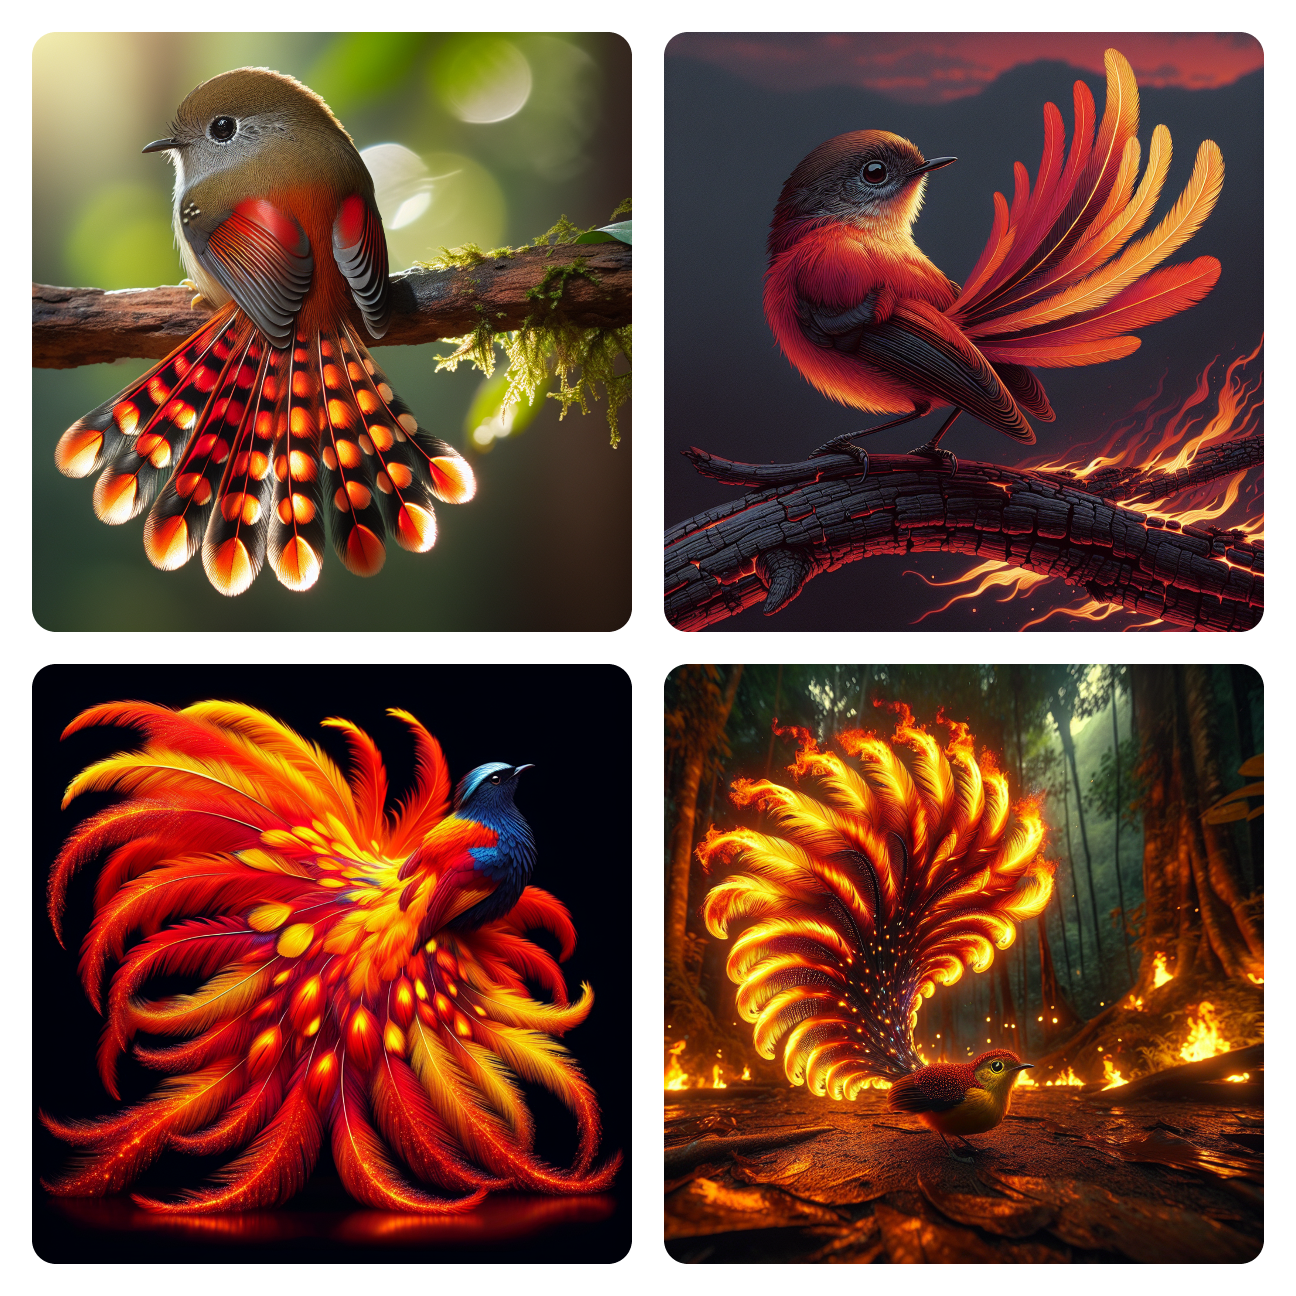 Image: The Flaming Peacock: Tail's Fury